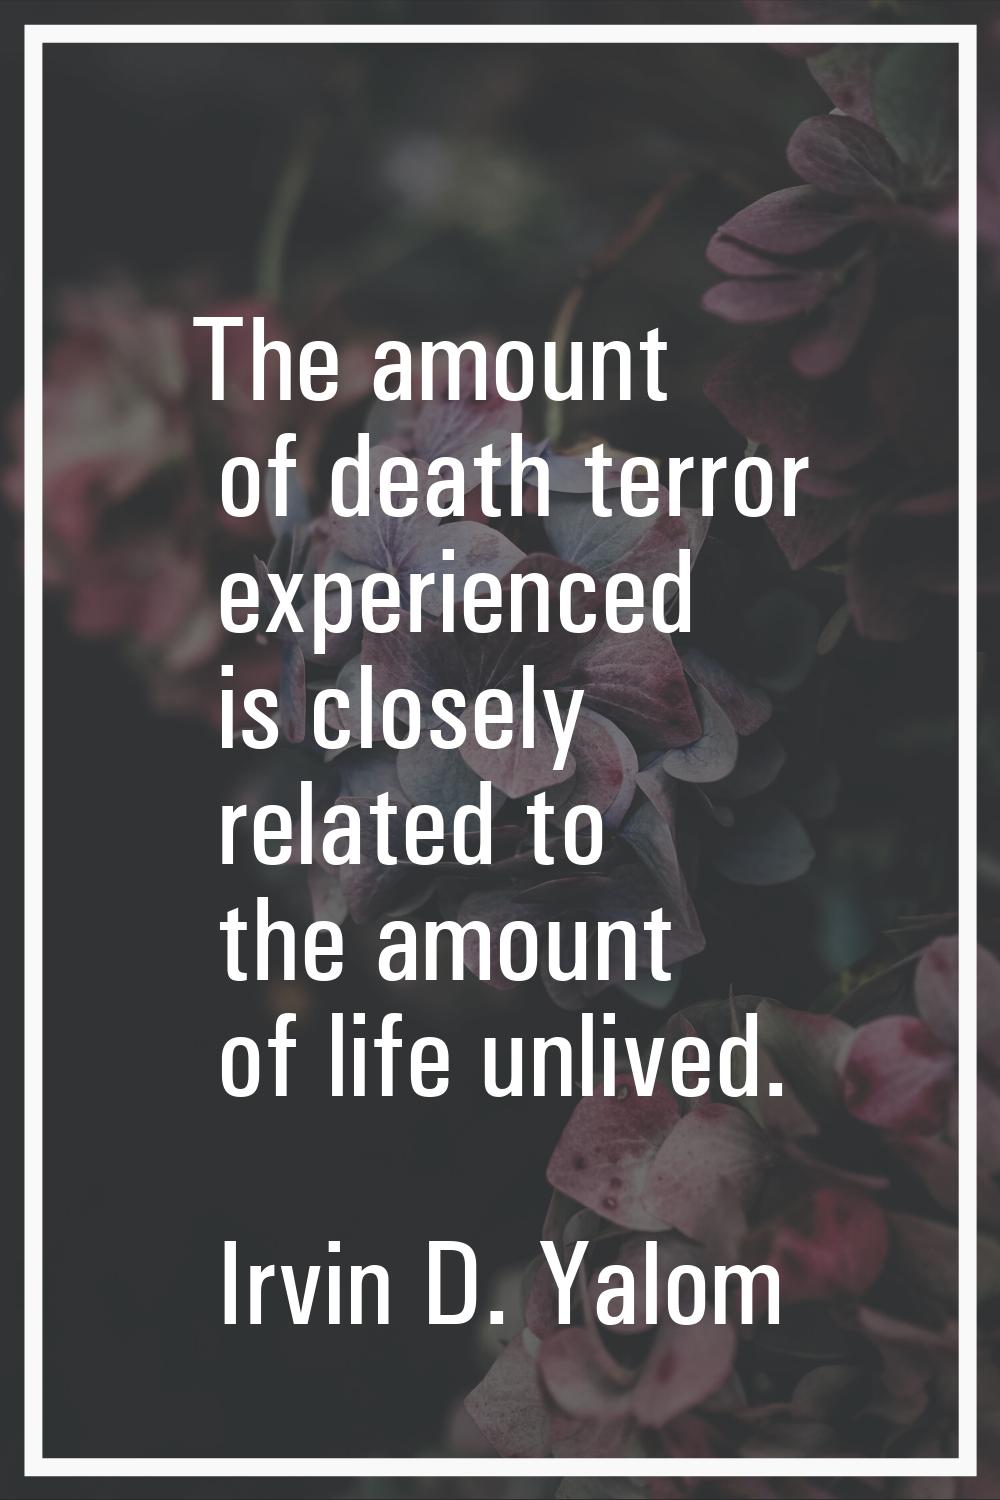 The amount of death terror experienced is closely related to the amount of life unlived.